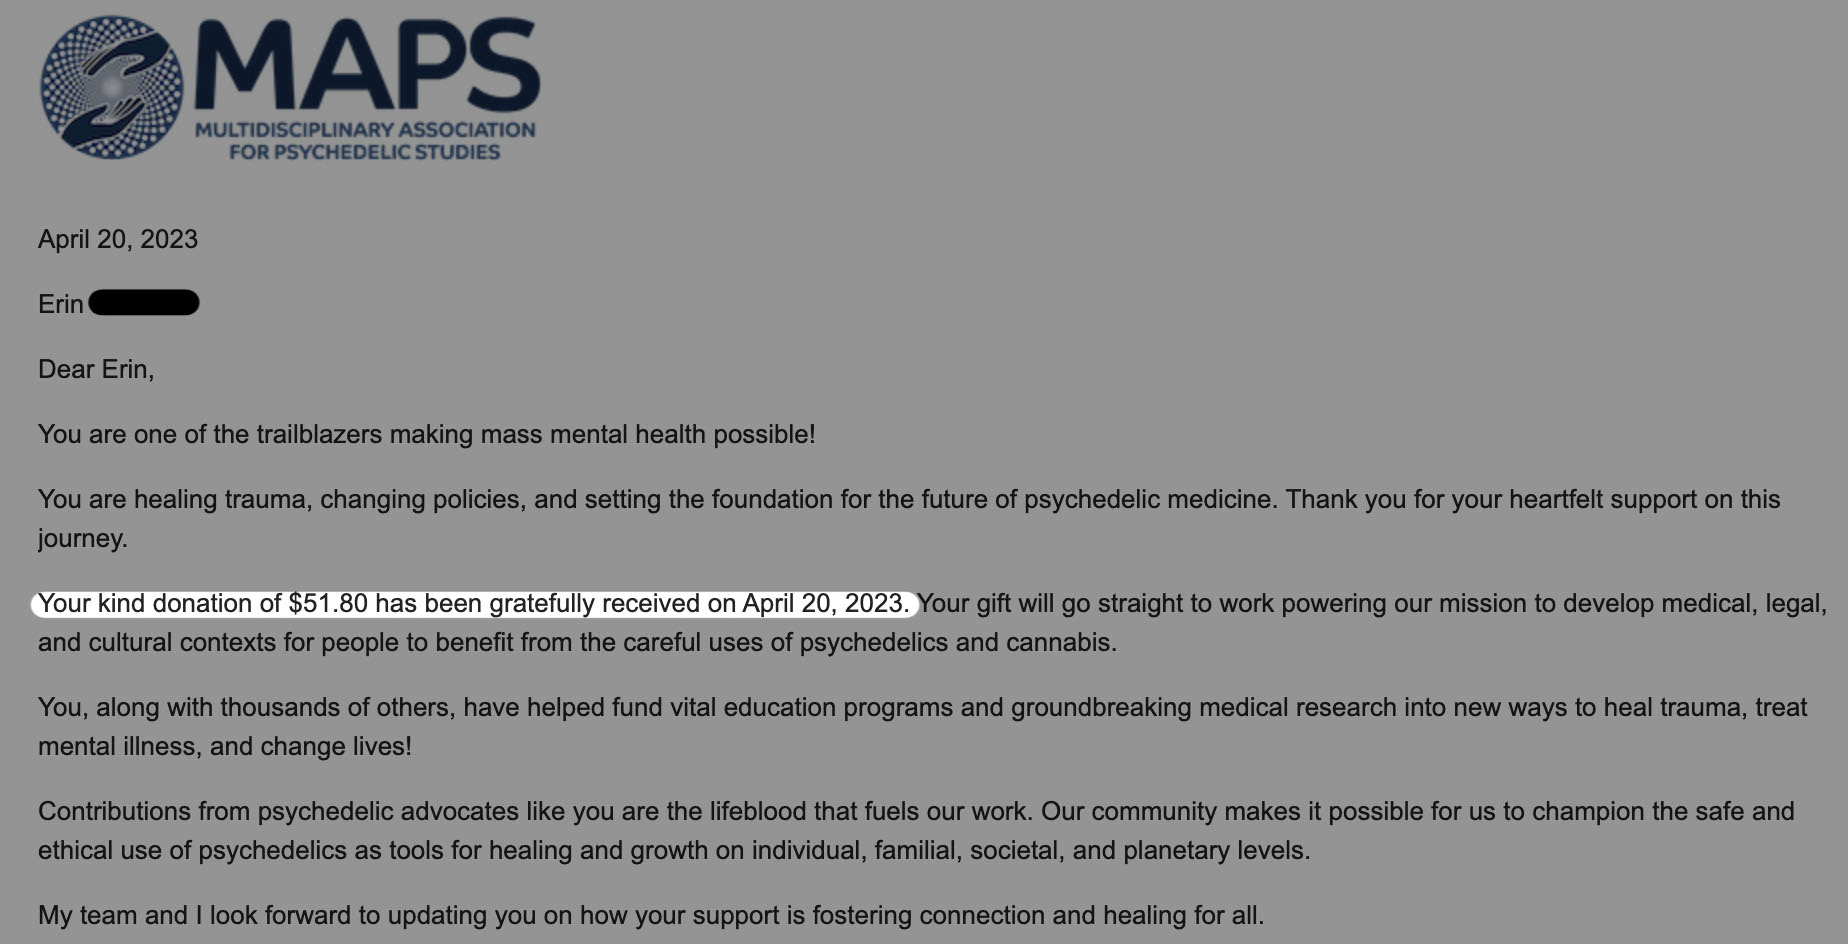 donation transparency. $50 was donated to MAPS. Multidisciplinary Association for Psychedelic Studies 